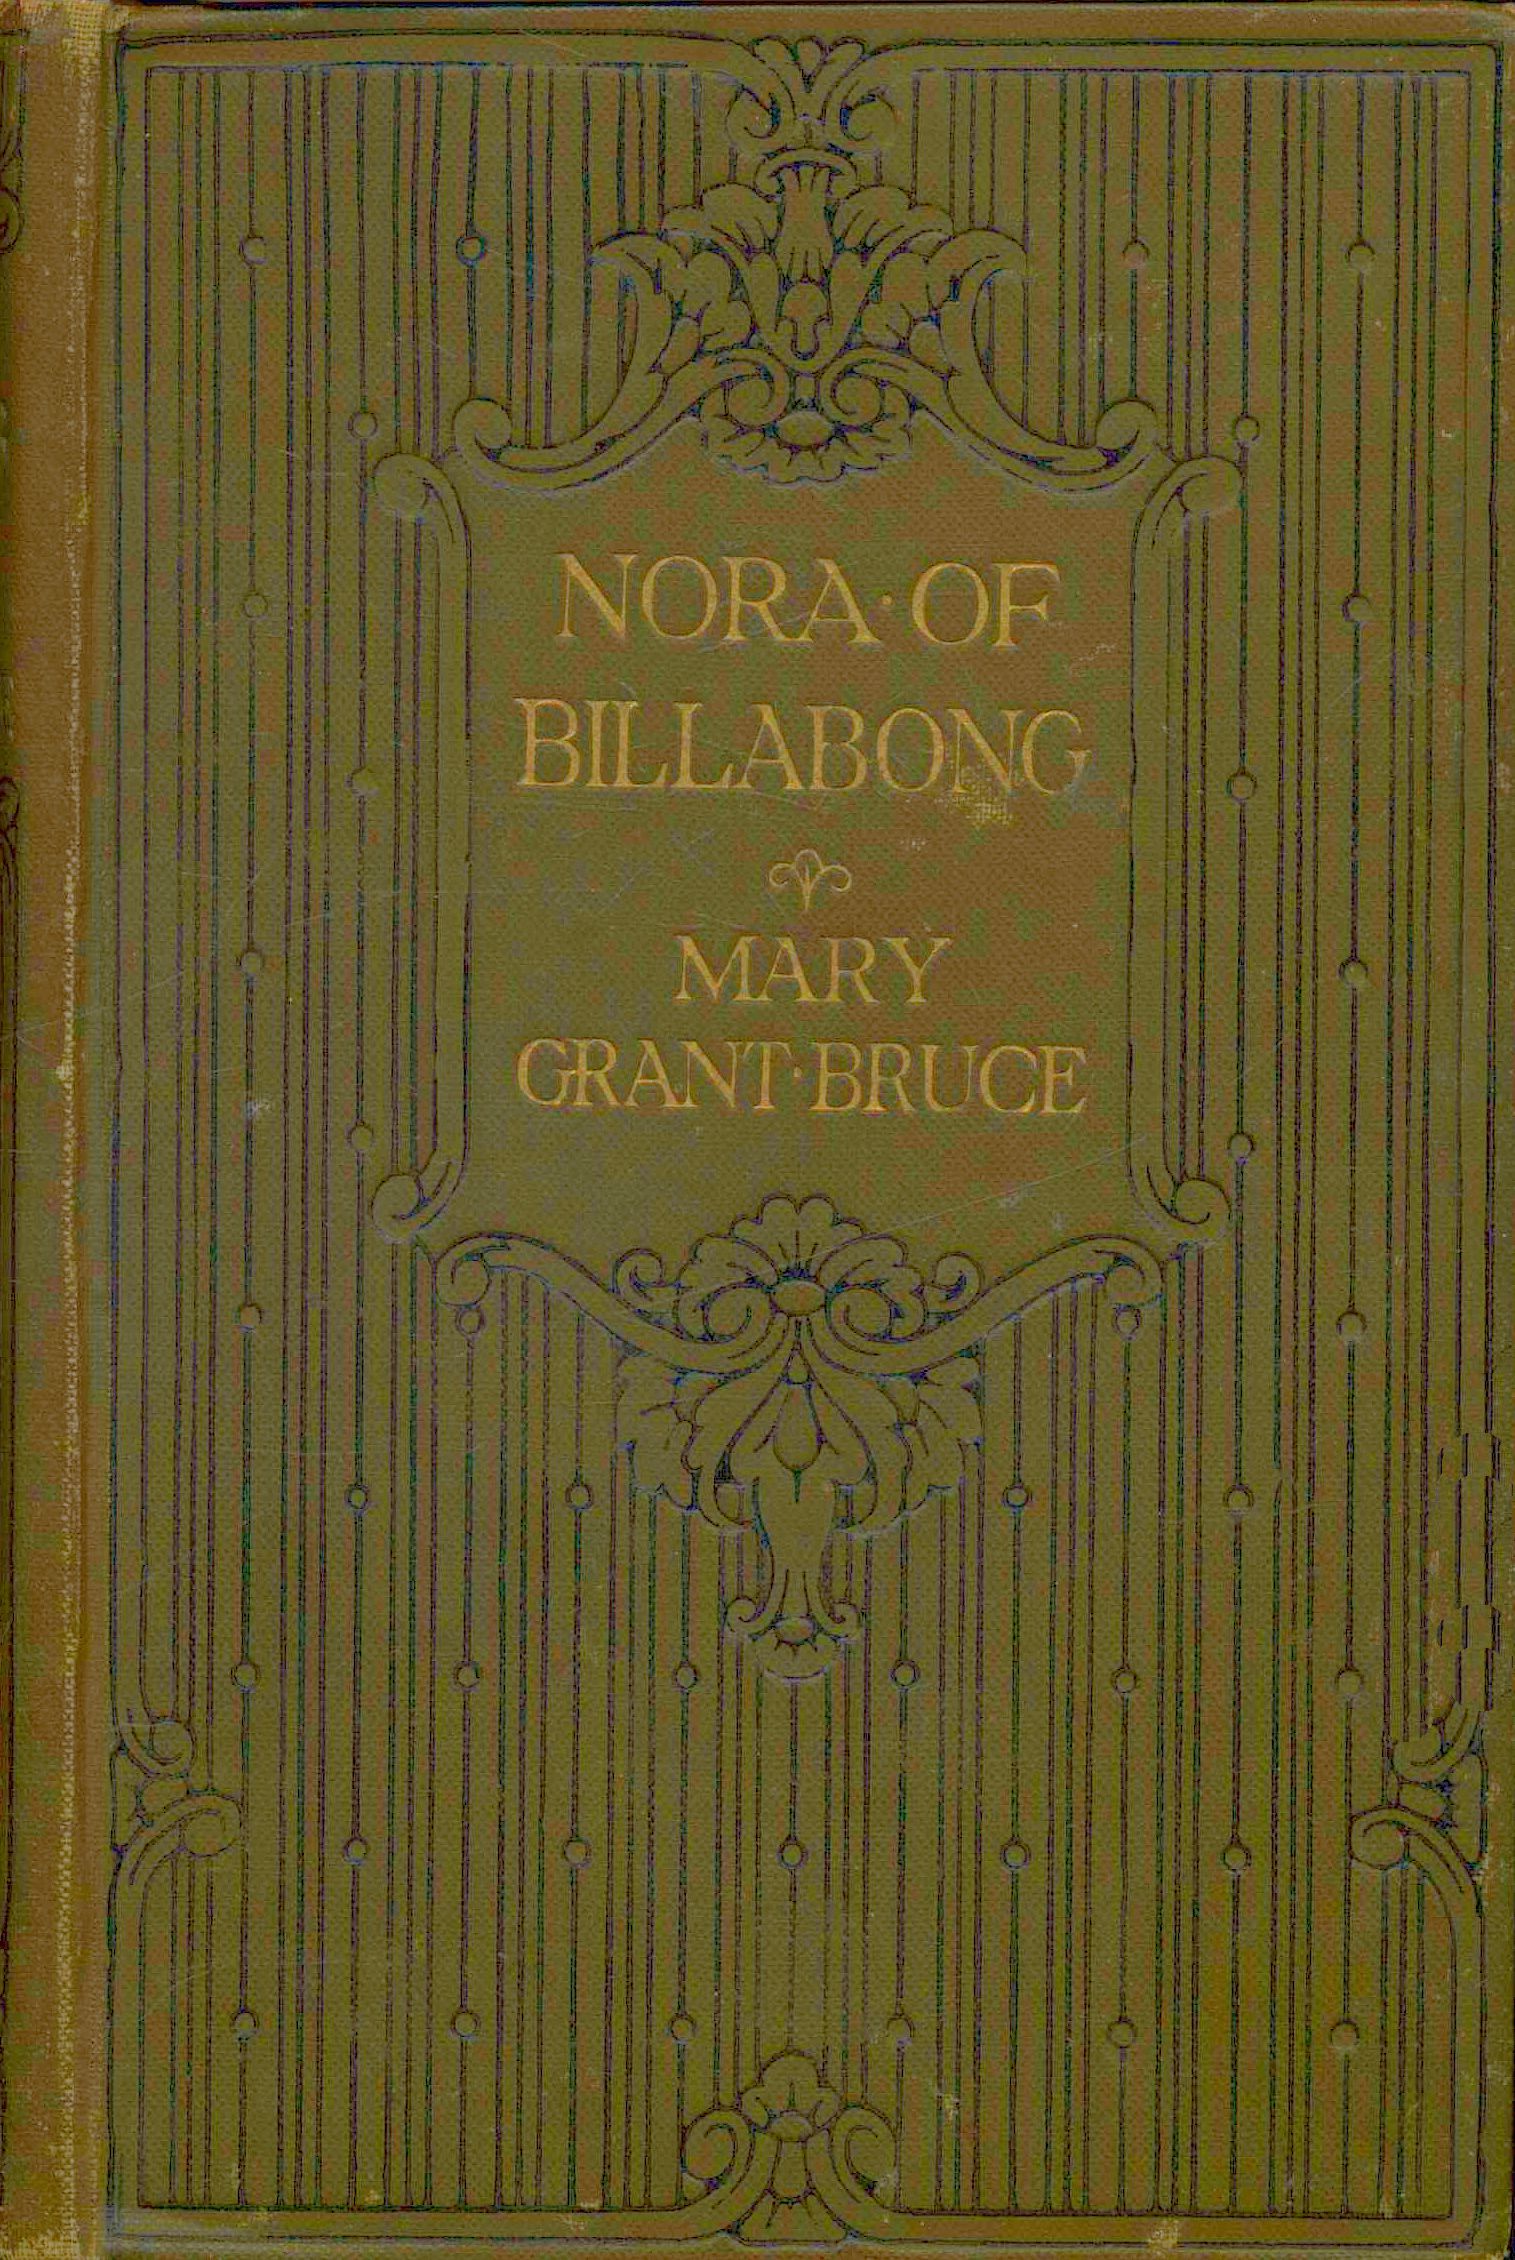 of Bruce Gutenberg Billabong Norah Grant of Mary by eBook The Project